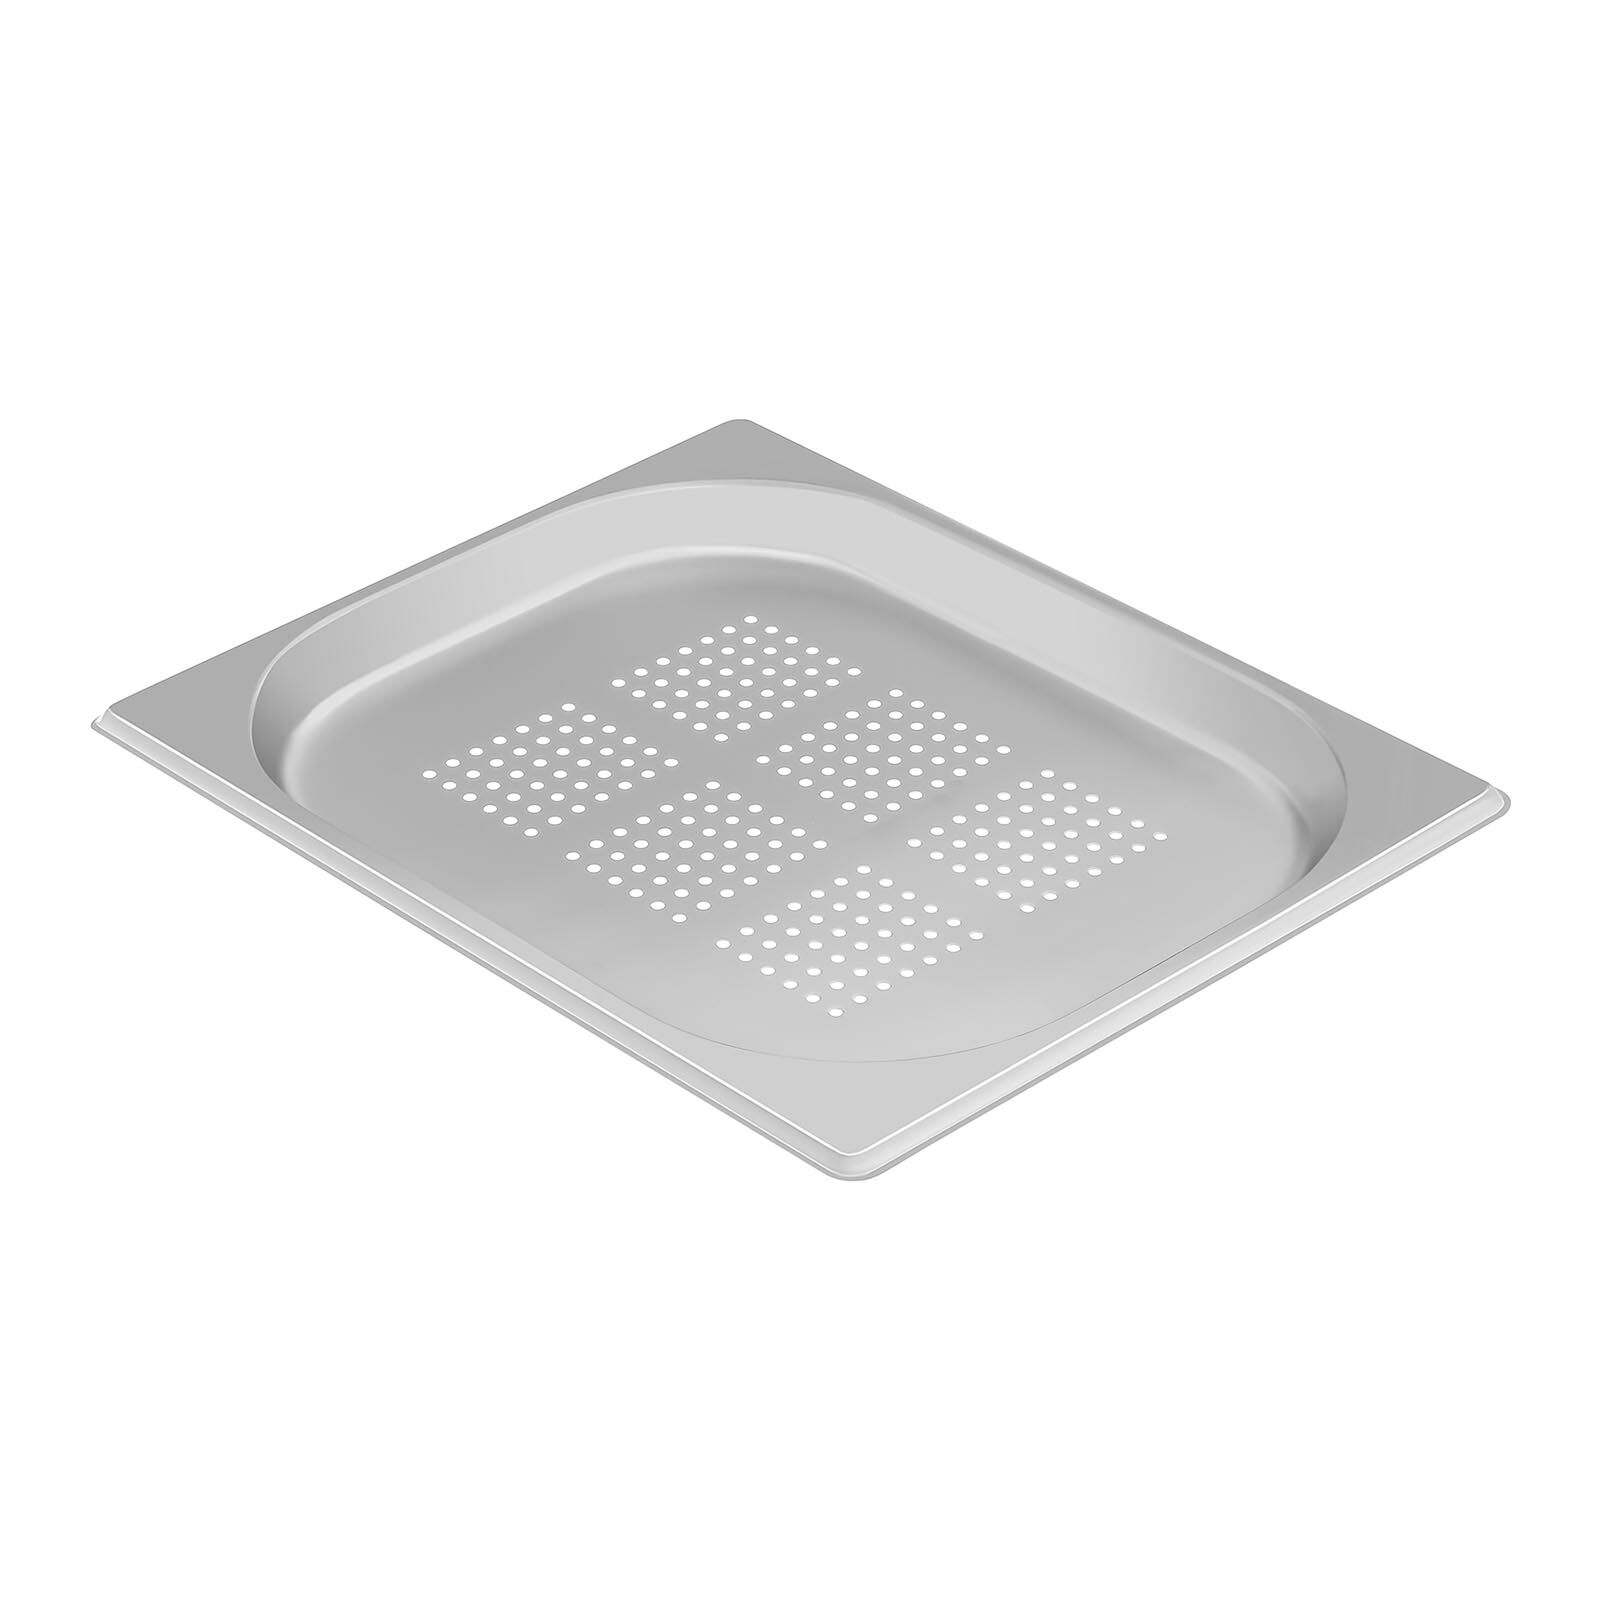 Royal Catering Gastronorm Tray - 1/2 - 20 mm - Perforated